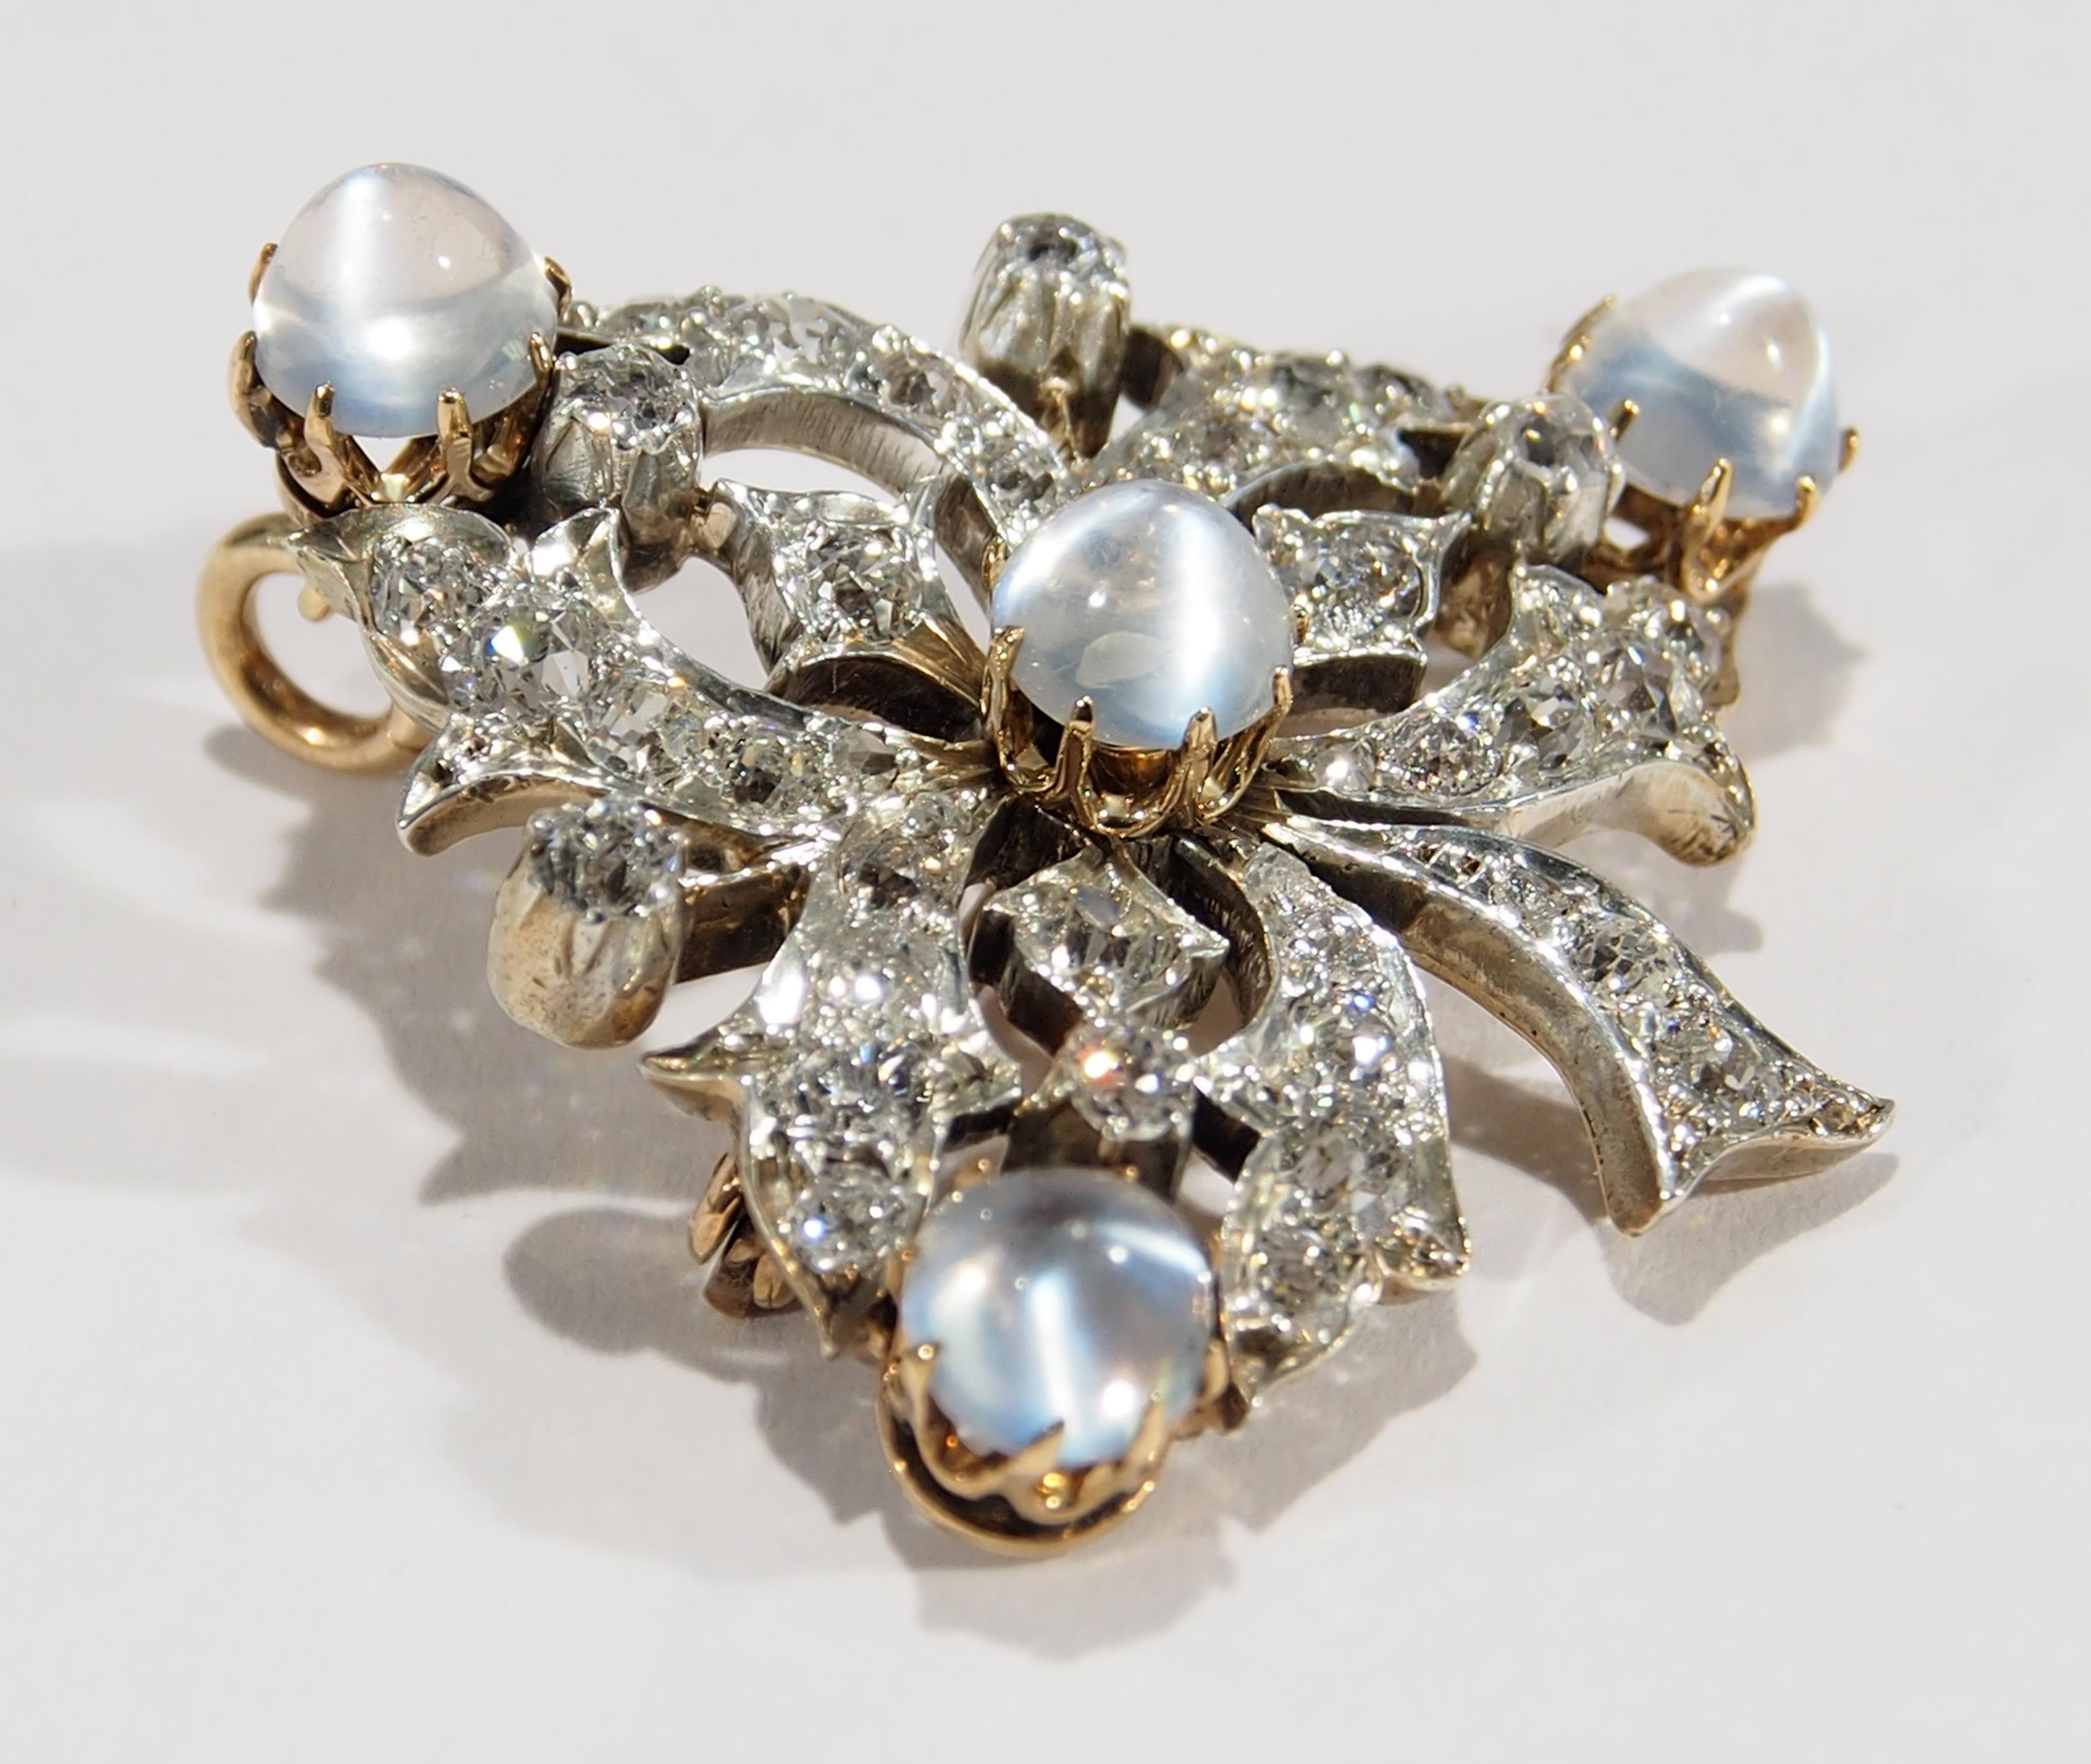 This is a stunning example of Victorian Jewelry a Silver and 10K White Gold Brooch reminiscent of a Grape Cluster set with (4) Moon Stones, approximately 3.0ctw  and 36 Rose Cut Diamonds.  The Diamonds are G-I in color, VS-I1 in Clarity and